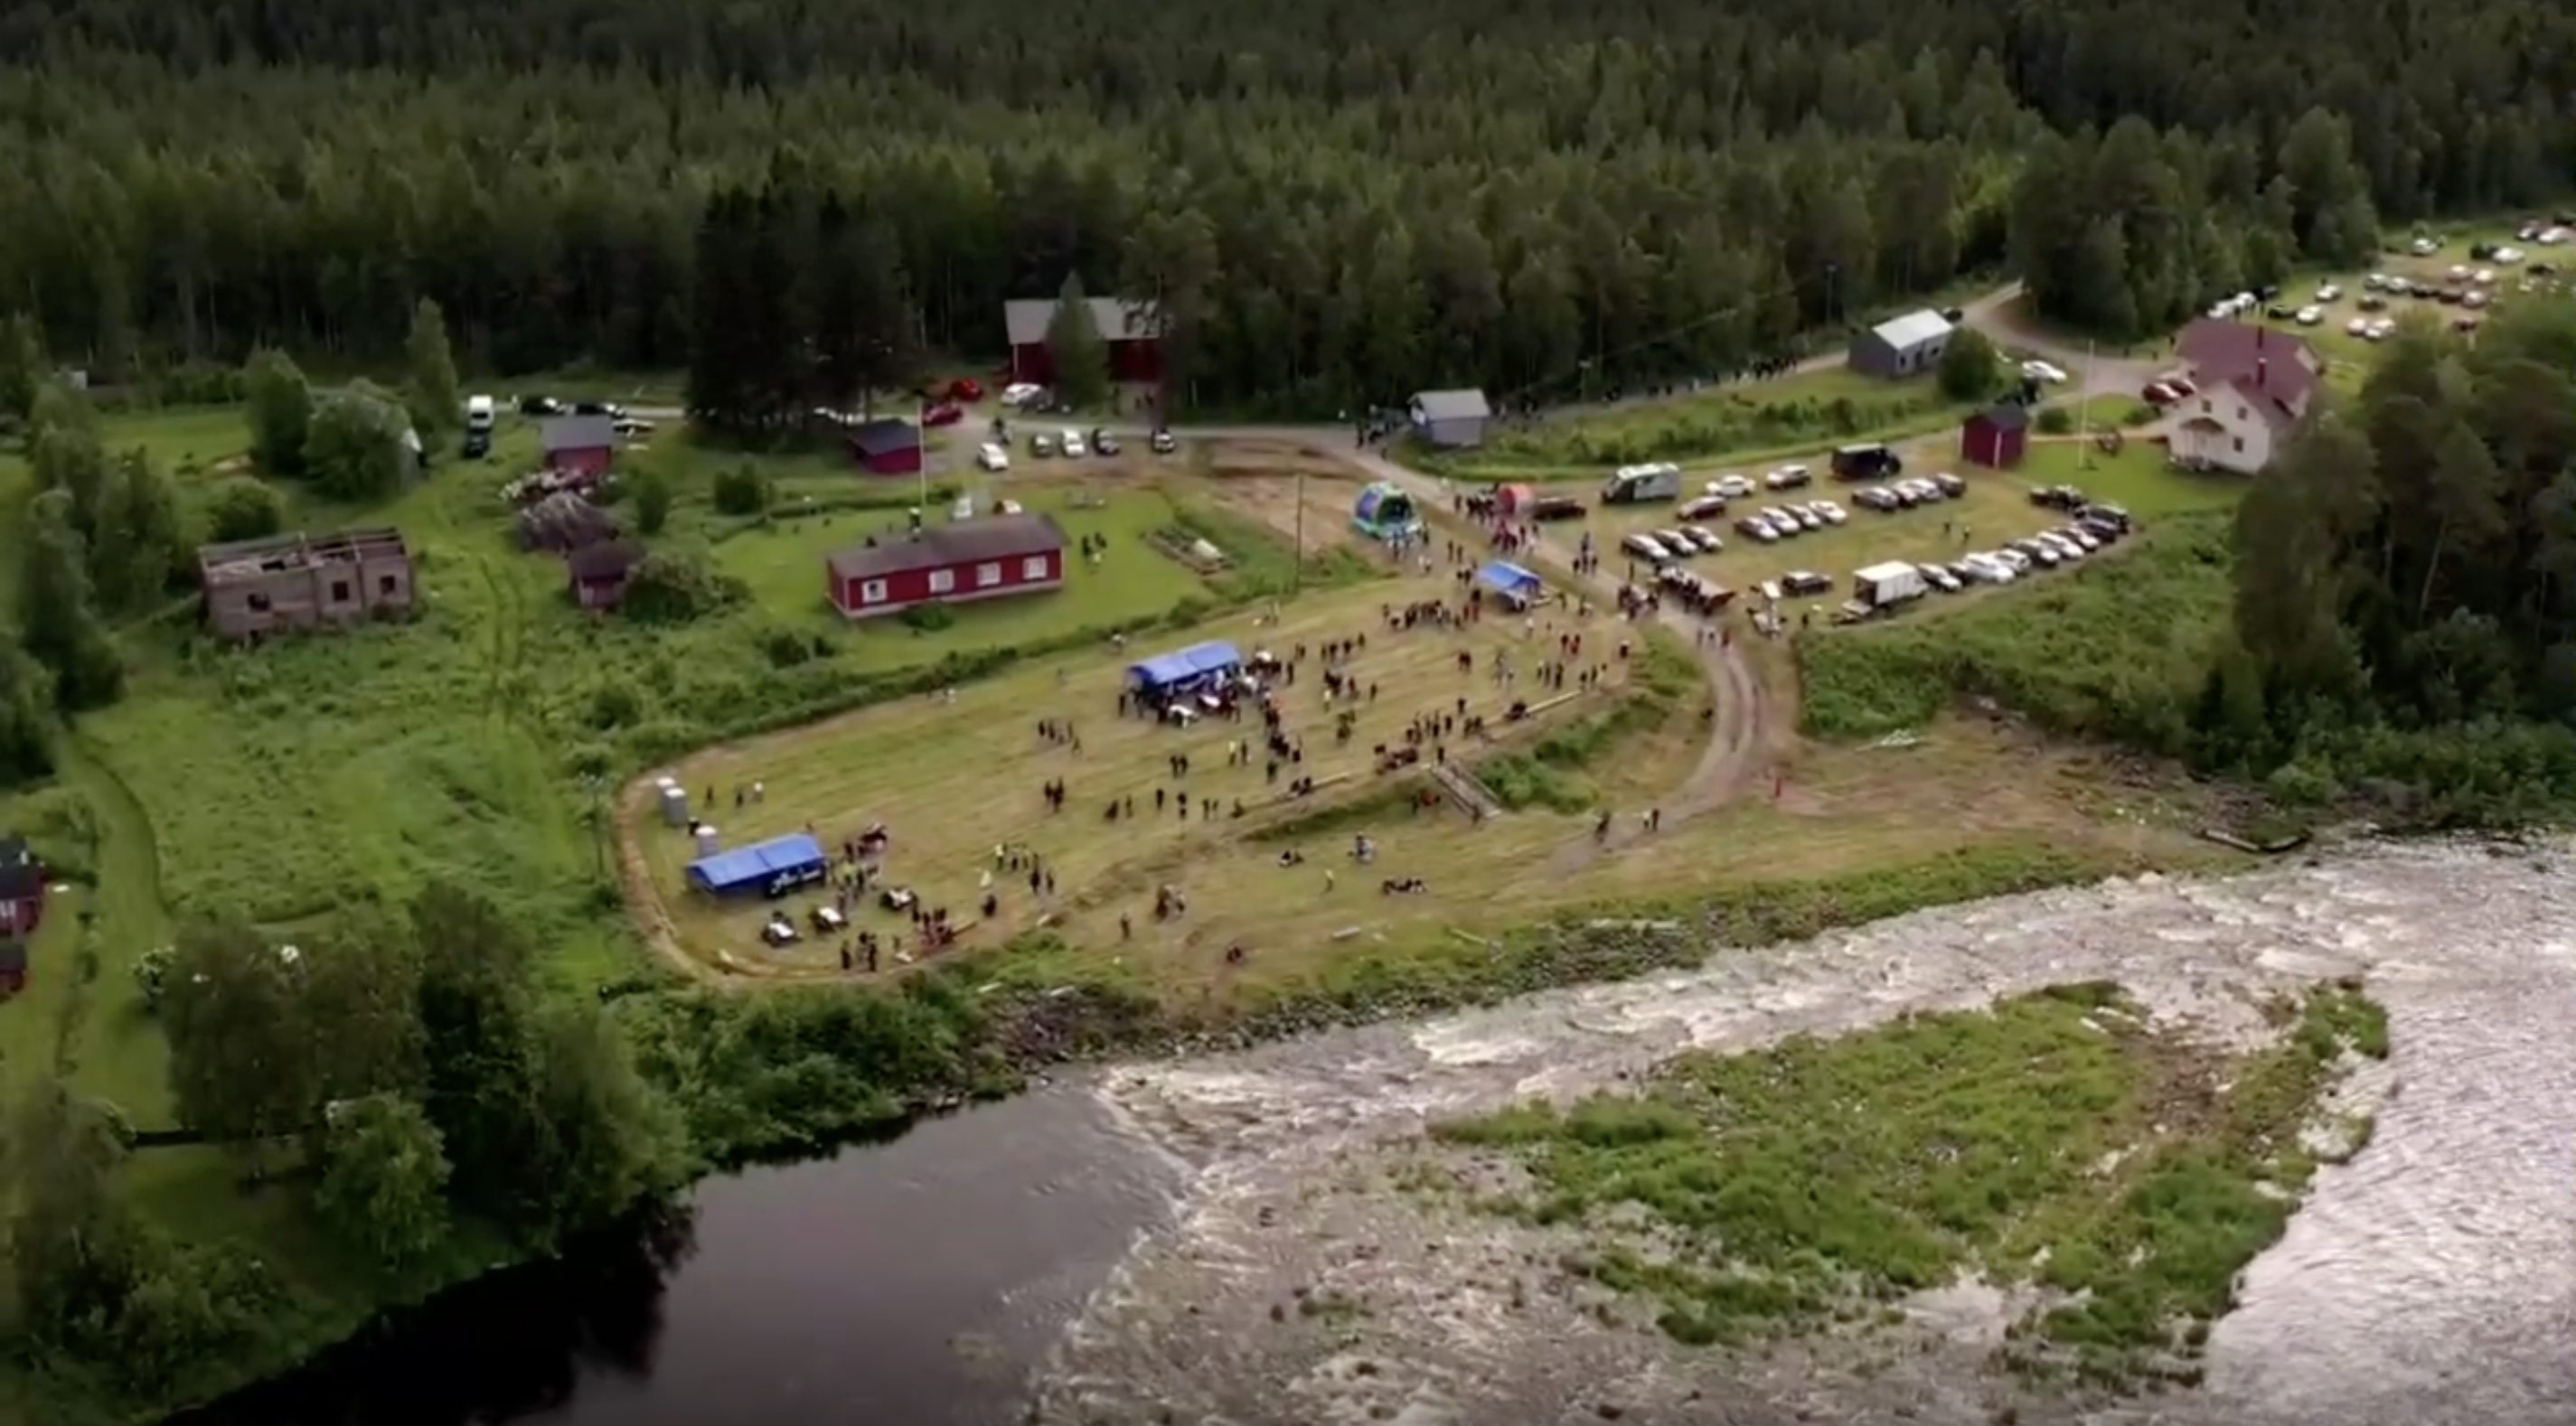 Streaming of the rafting competition, LED screen and drone aerial view